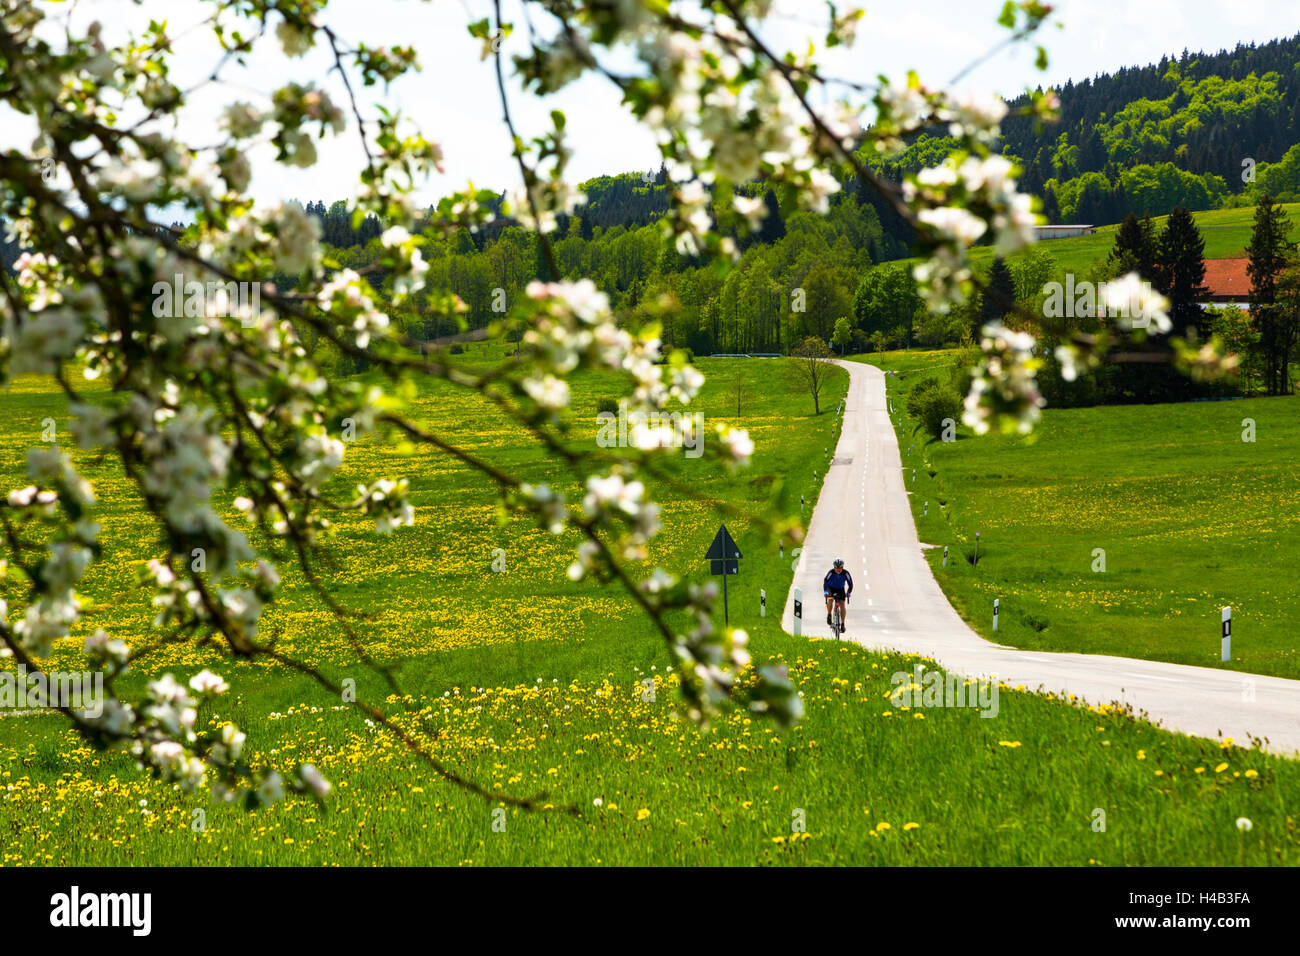 Germany, Bavaria, cyclist riding on country road in spring Stock Photo